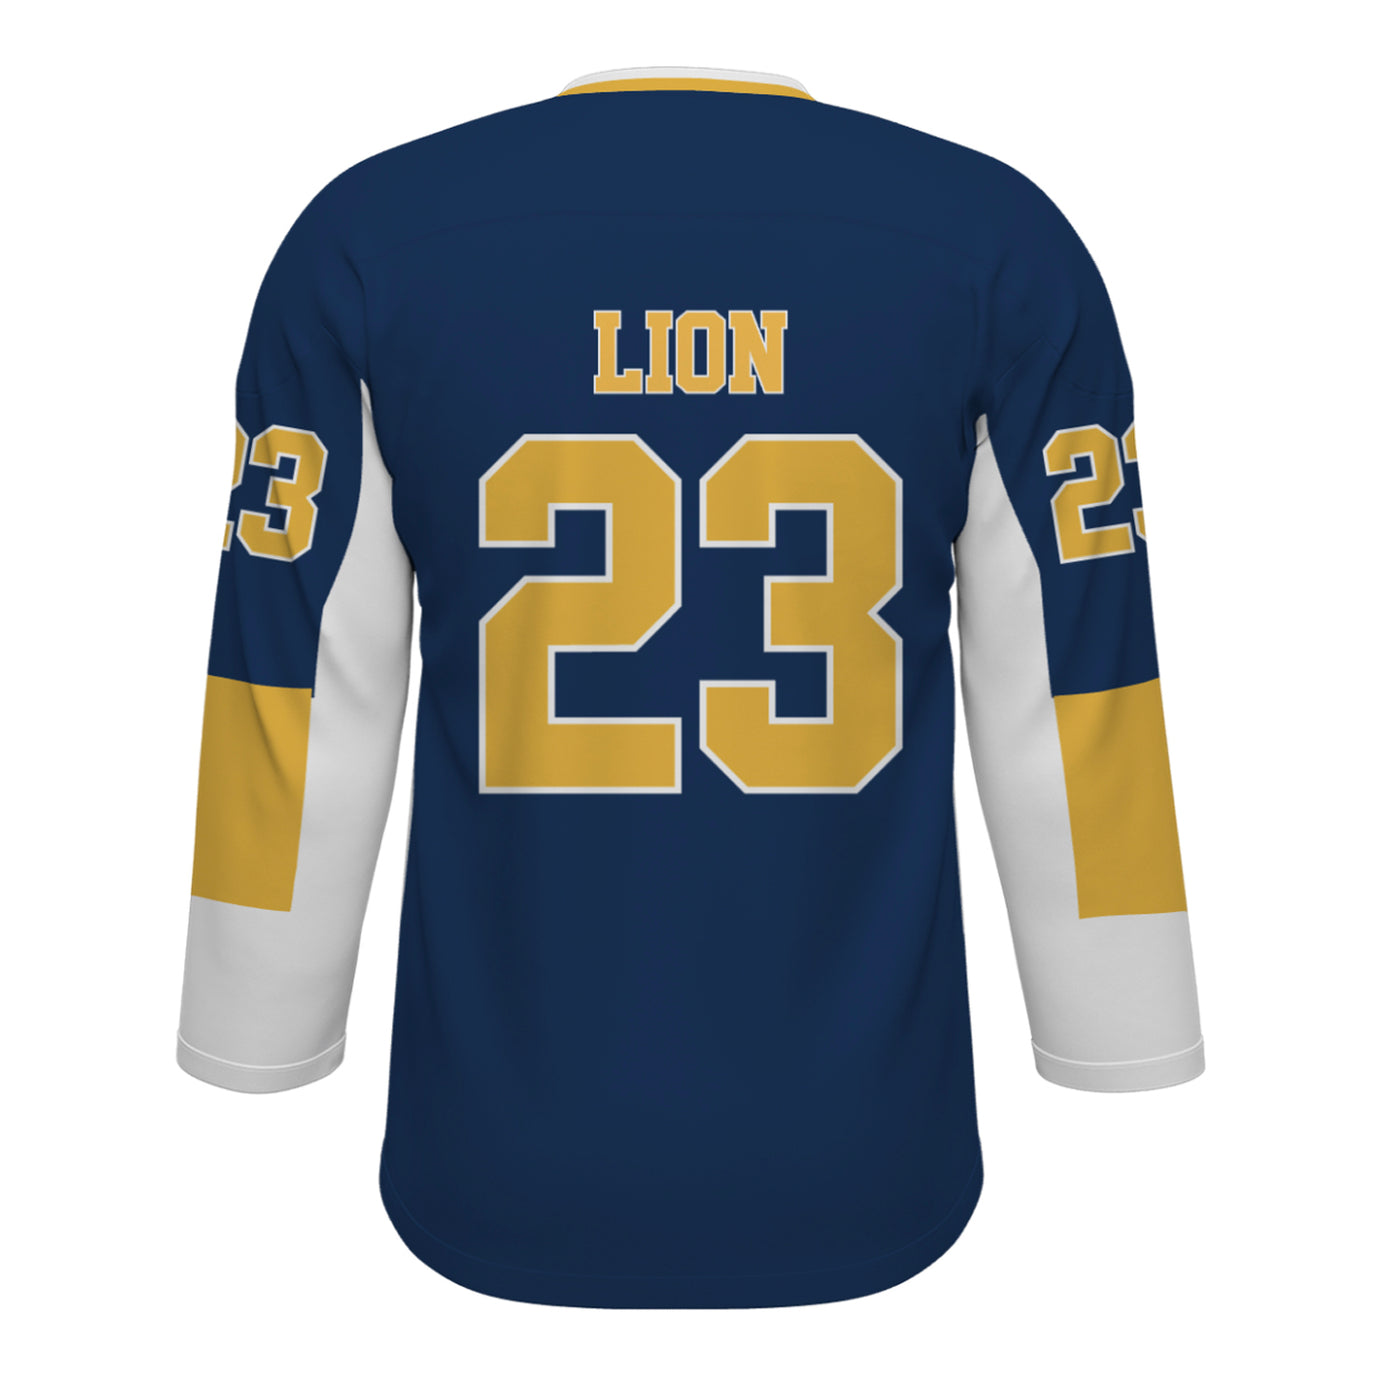 Only 45.00 usd for Custom Hockey Jersey Online at the Shop